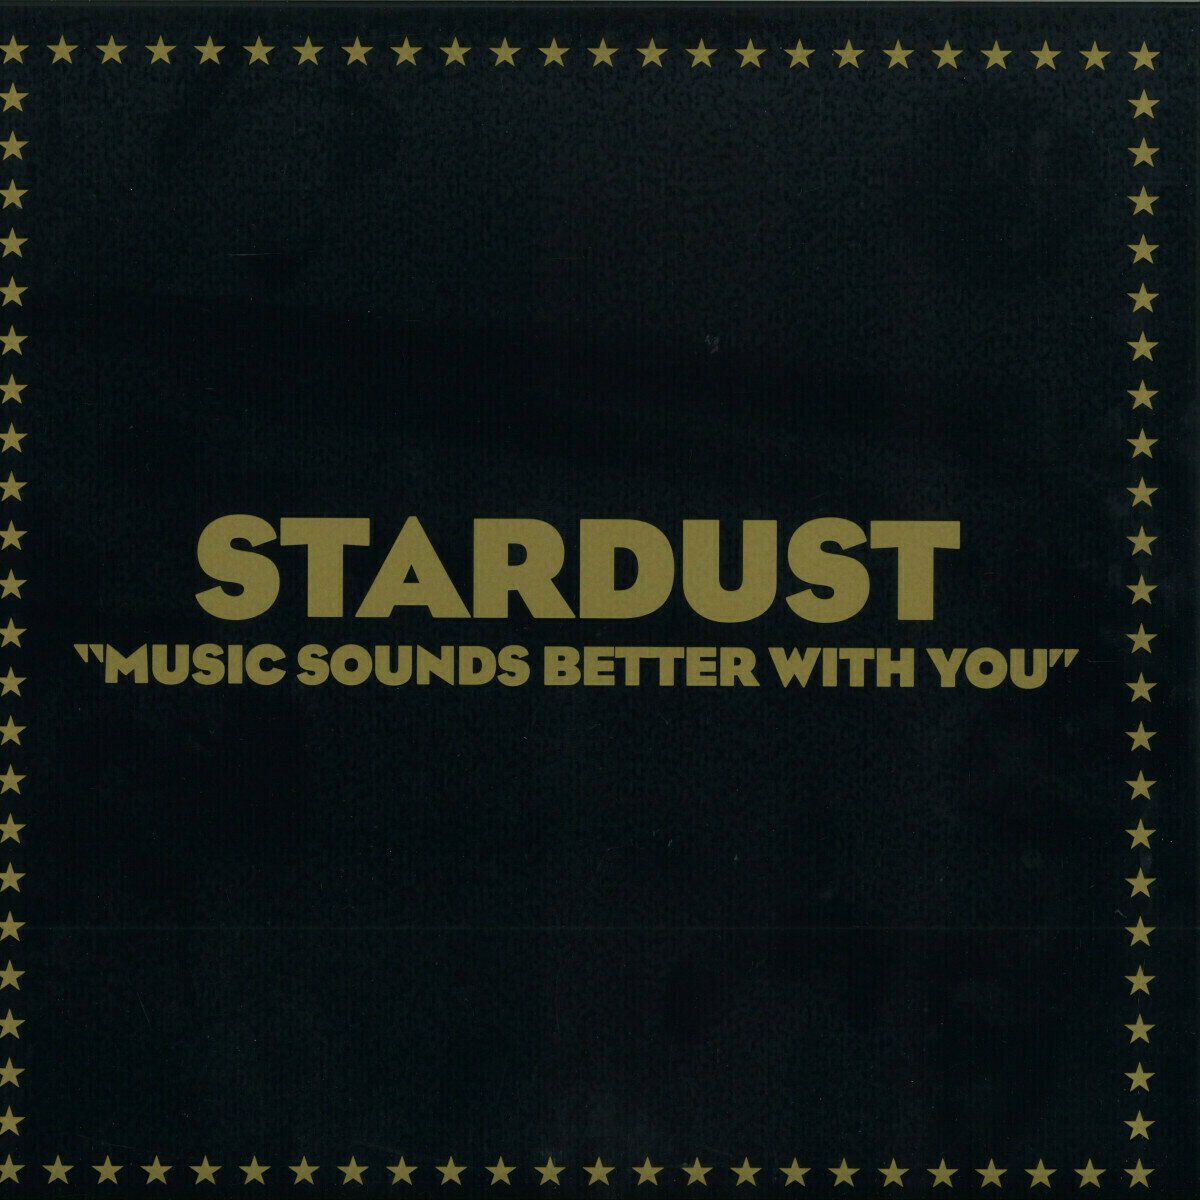 LP Stardust - Music Sounds Better With You (12" Vinyl)